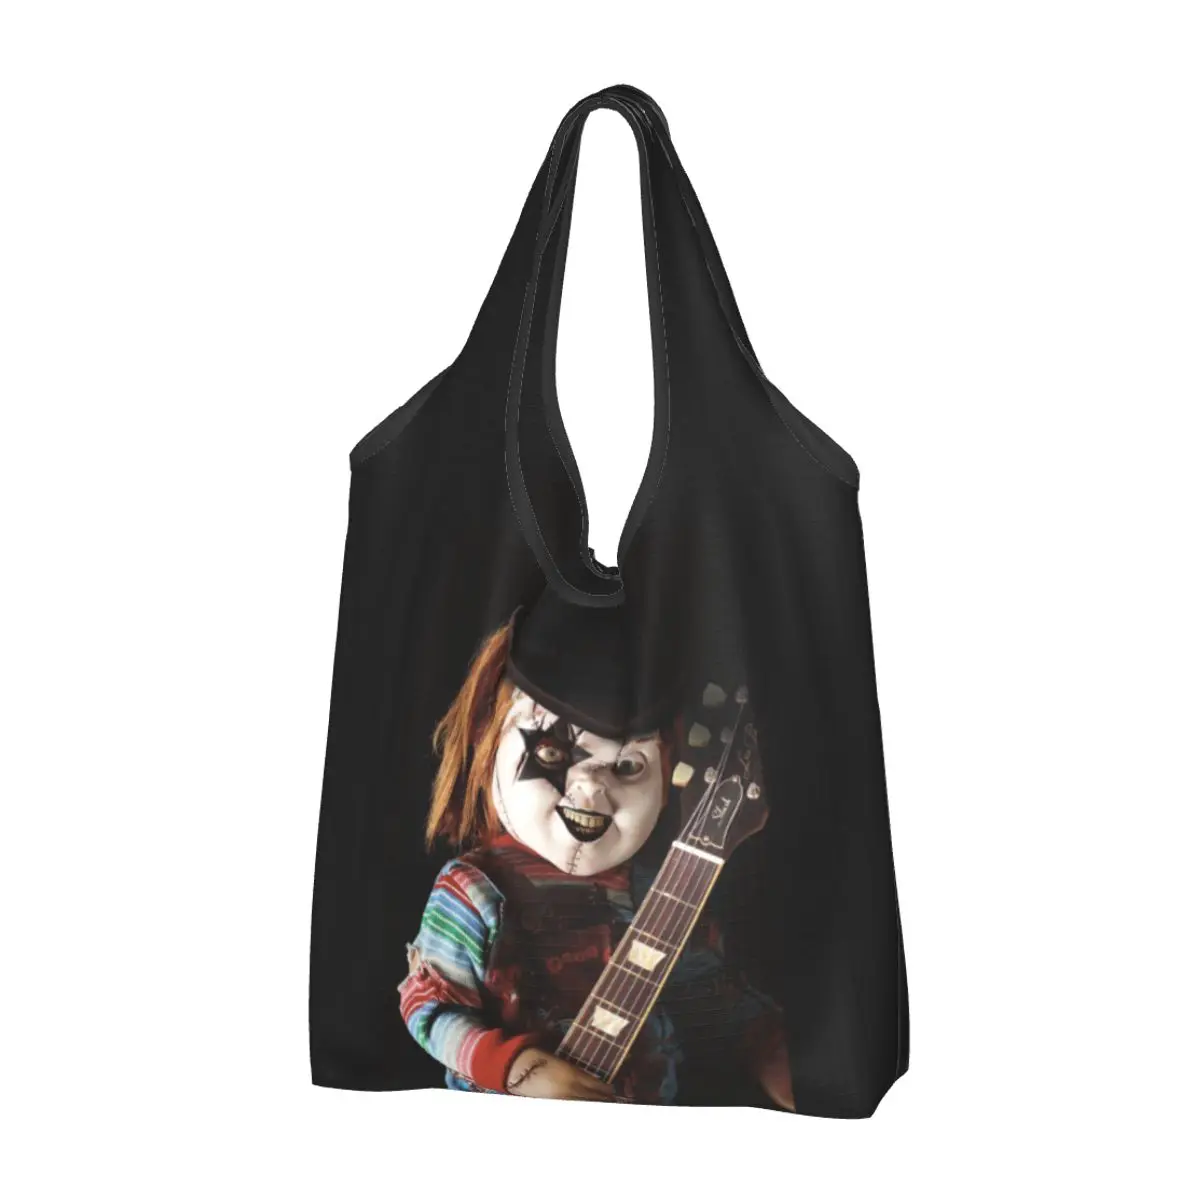 

Large Reusable Horror Movie Chucky Grocery Bags Recycle Foldable Halloween Childs Play Mistery Shopping Eco Bag Lightweight